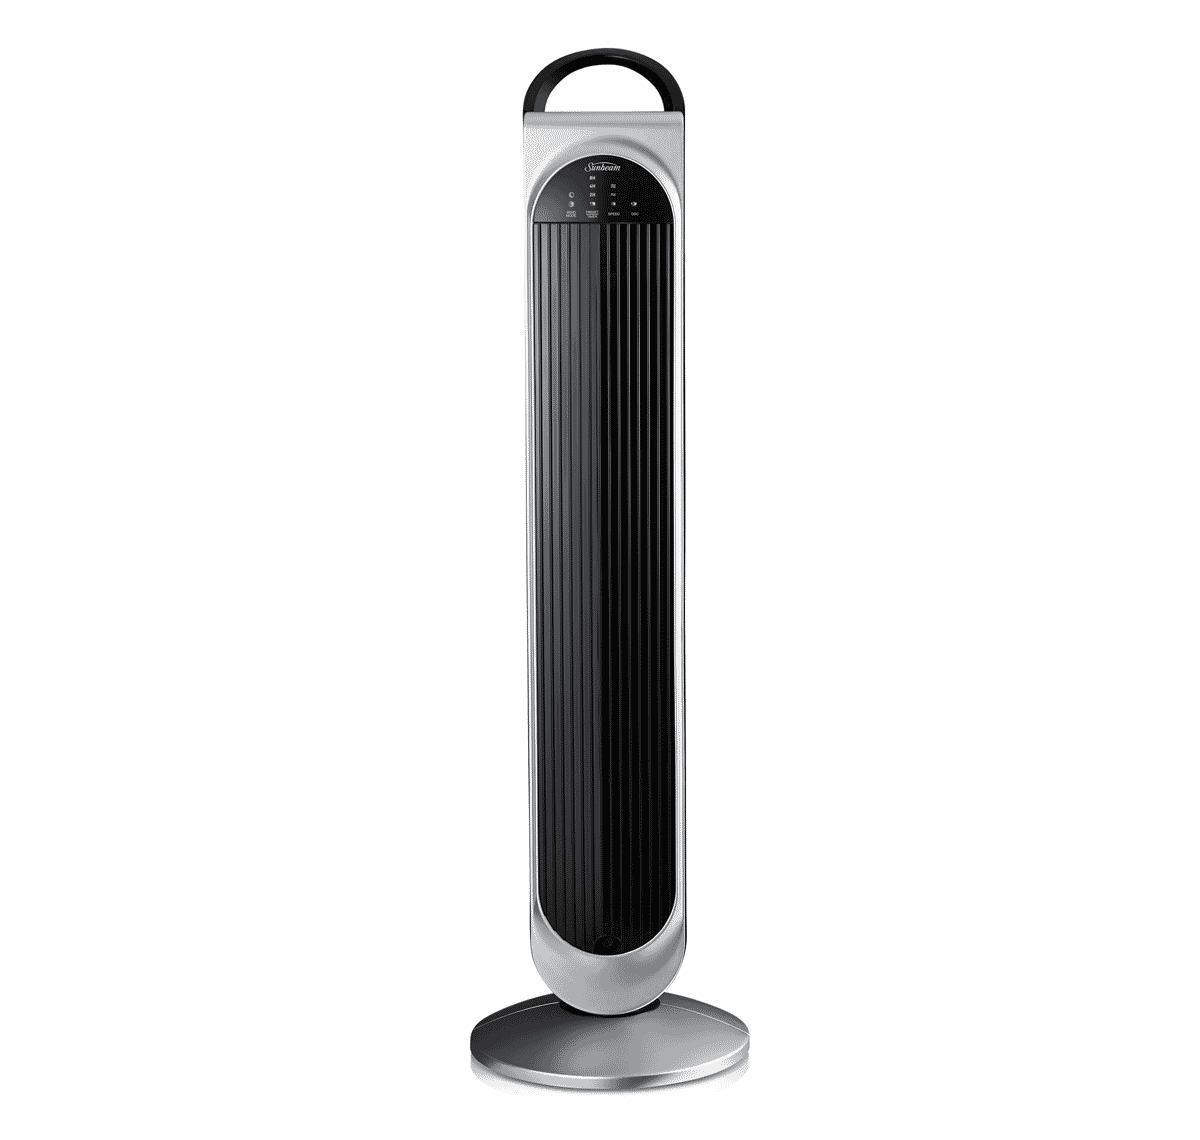 Sunbeam99cm Tower Fan With Remote in size 1200 X 1140